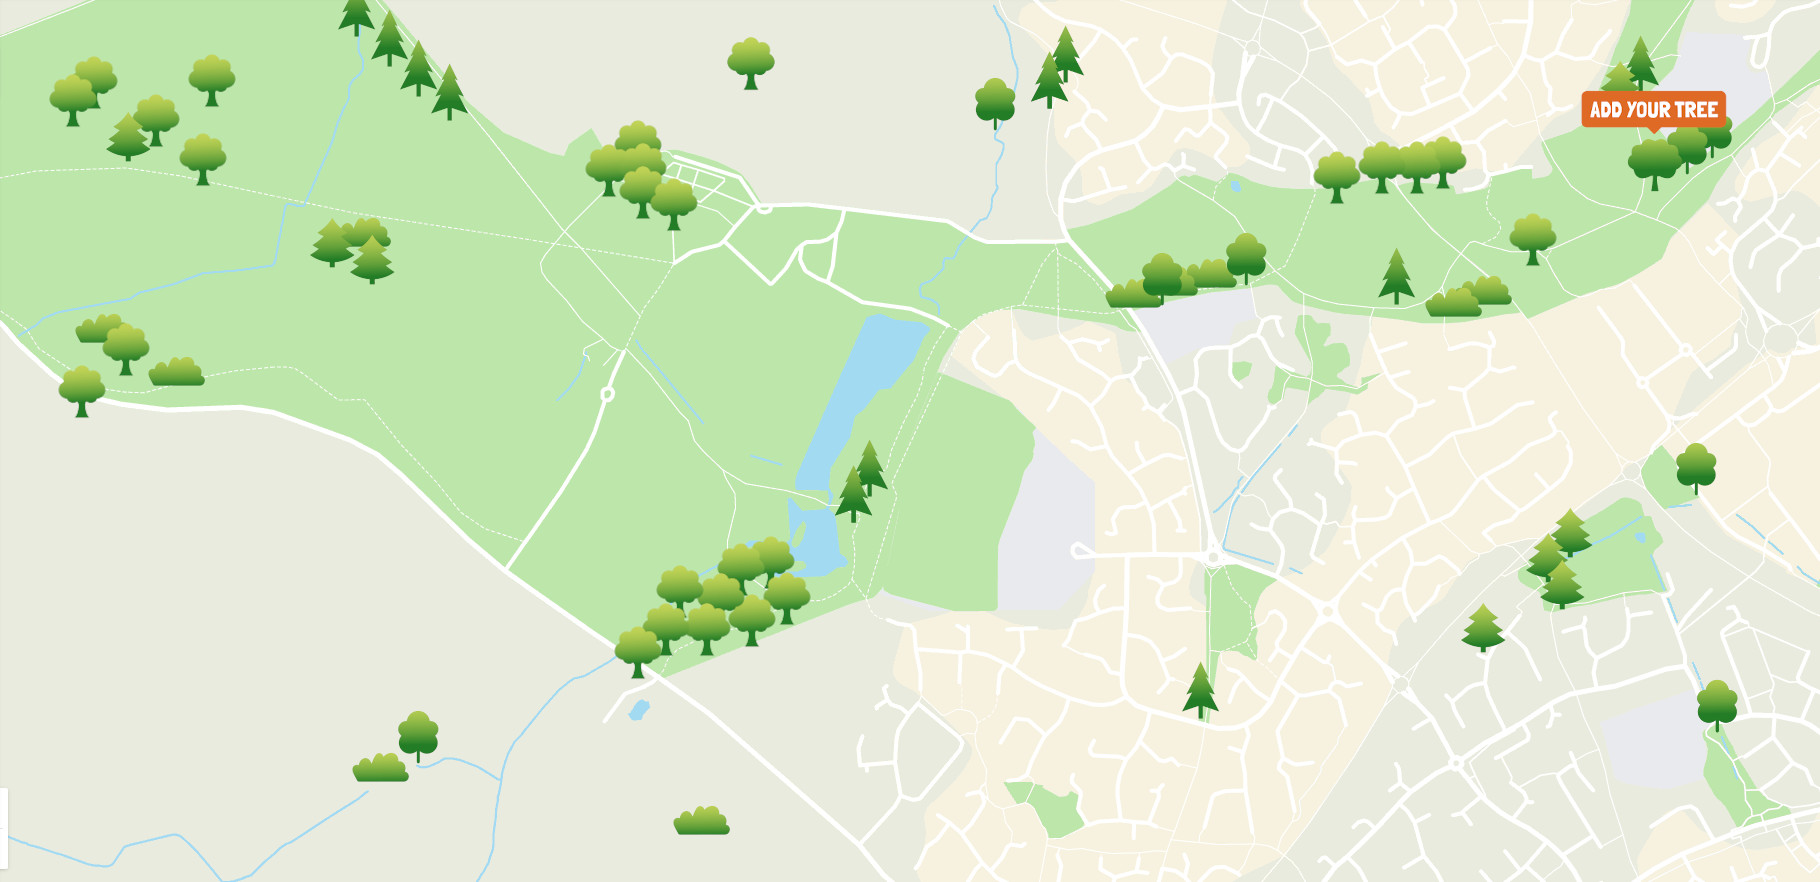 The TreeTrekk map, a place for people to record trees when they trek out.